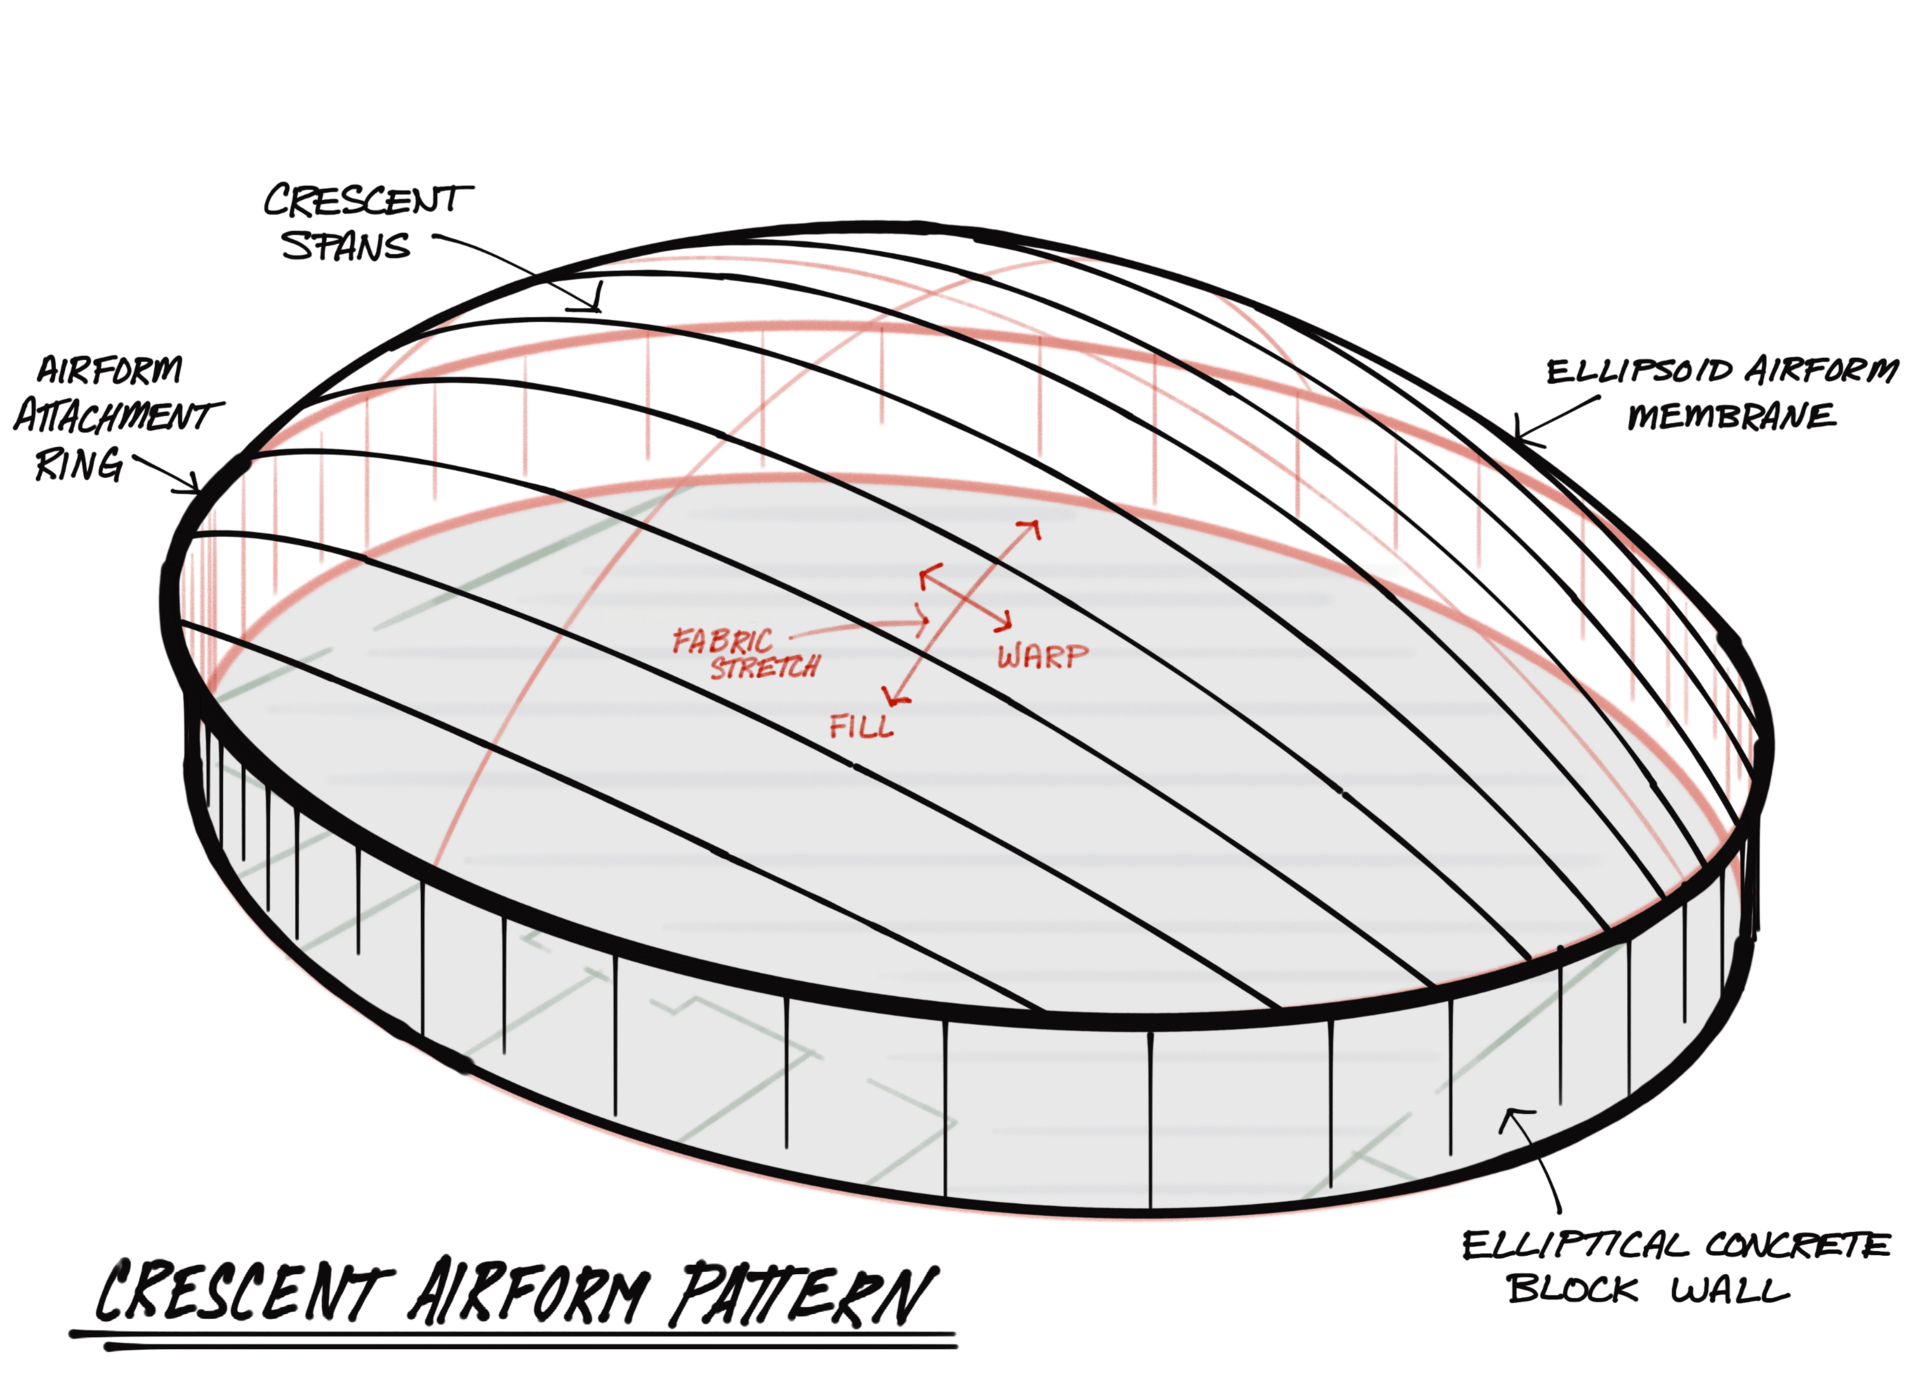 Sketch of the crescent ellipsoid Airform membrane pattern.